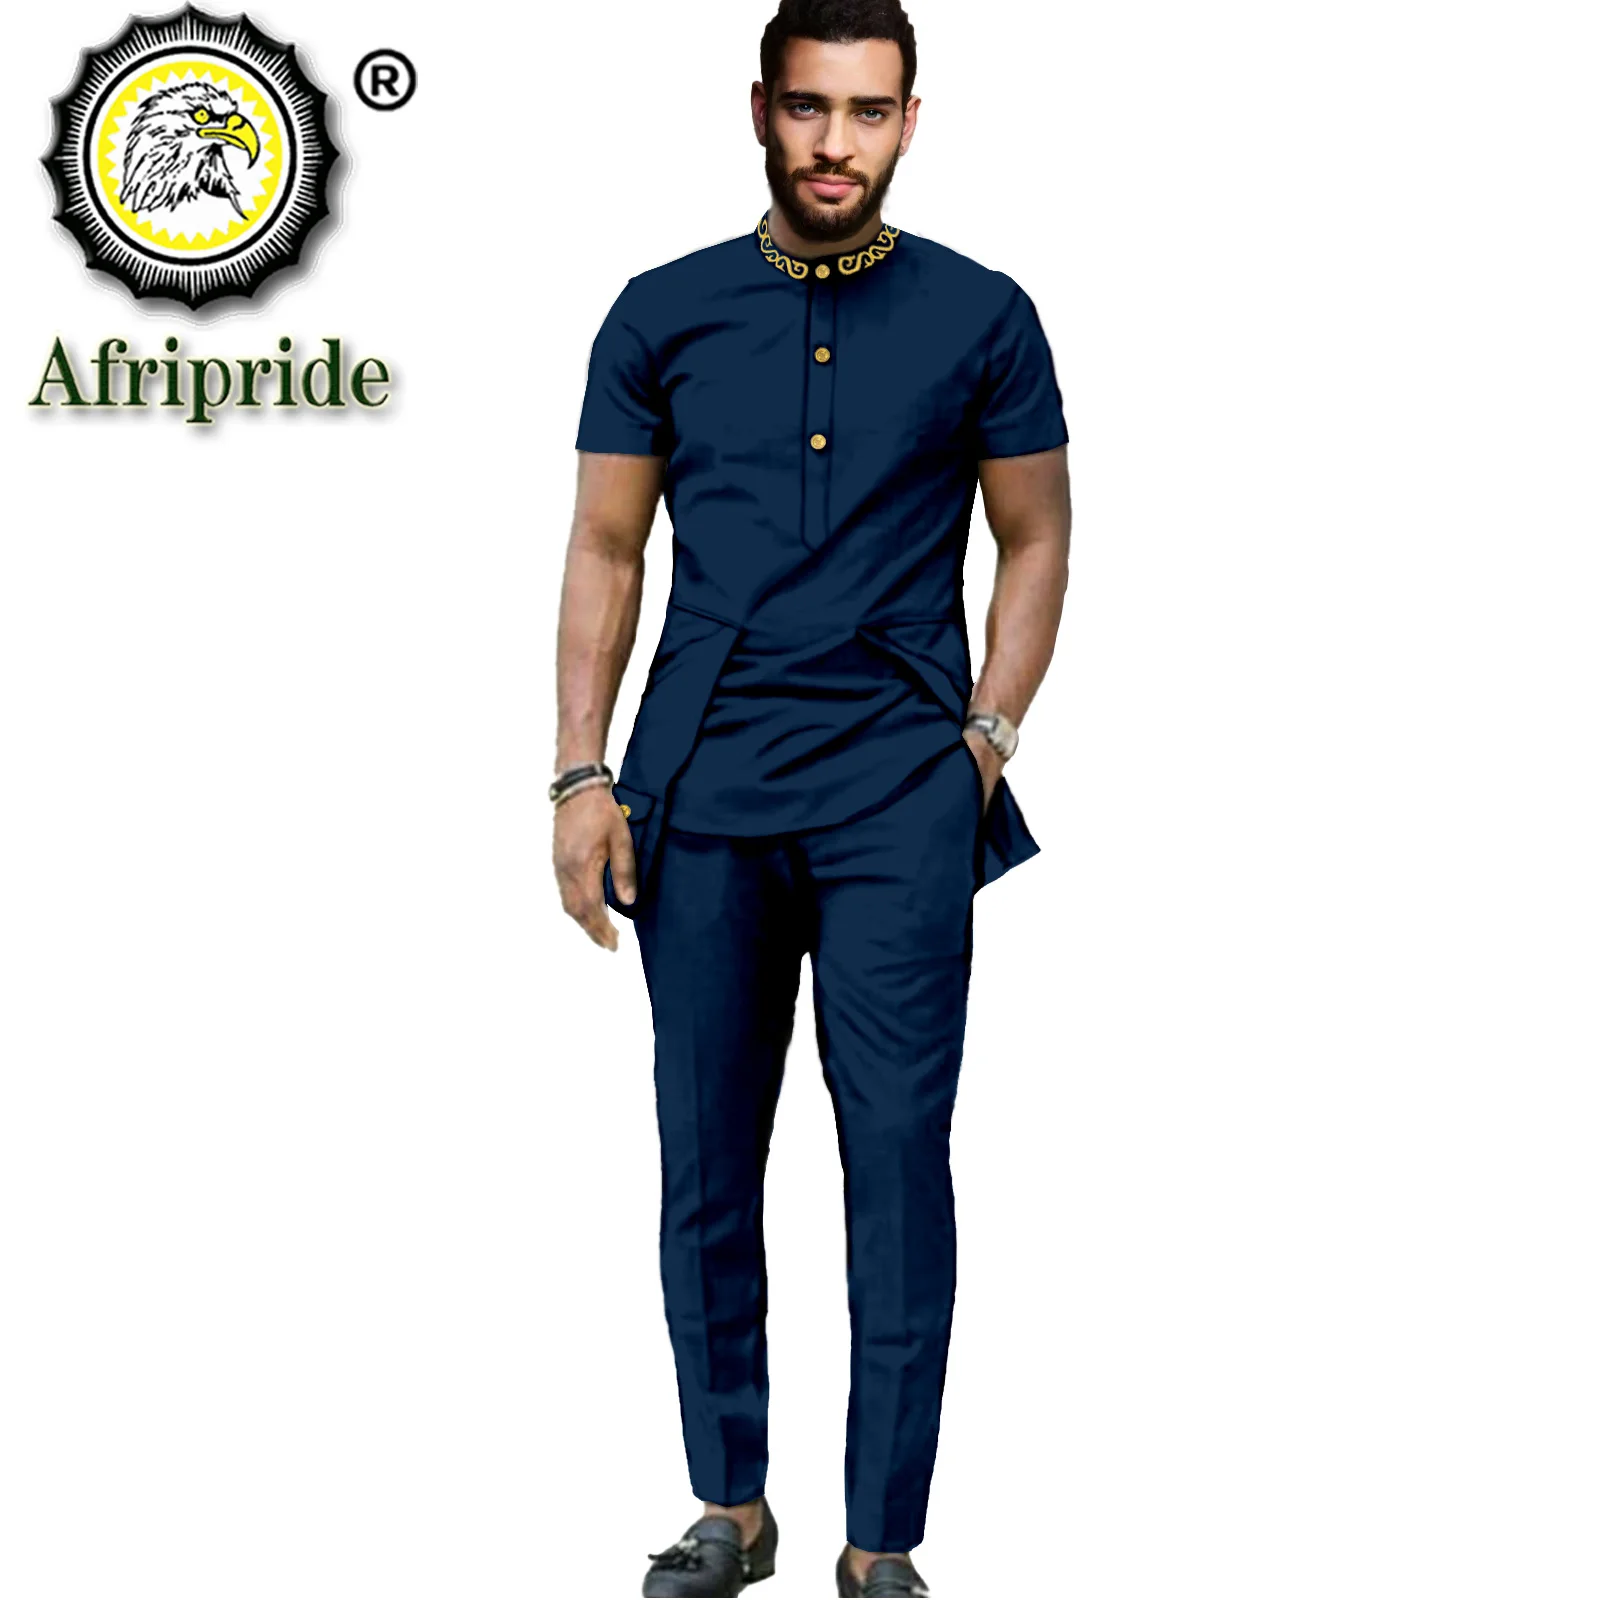 African Clothes for Men Embroidery Short Sleeve Shirt and Pant 2 Piece Set Dashiki Outfit Plus Size Tracksuit Blouse S2116011 2019 african men shirt and pants 2 piece set dashiki clothing ankara short sleeve blouse tracksuit wear tops afripride a1916041